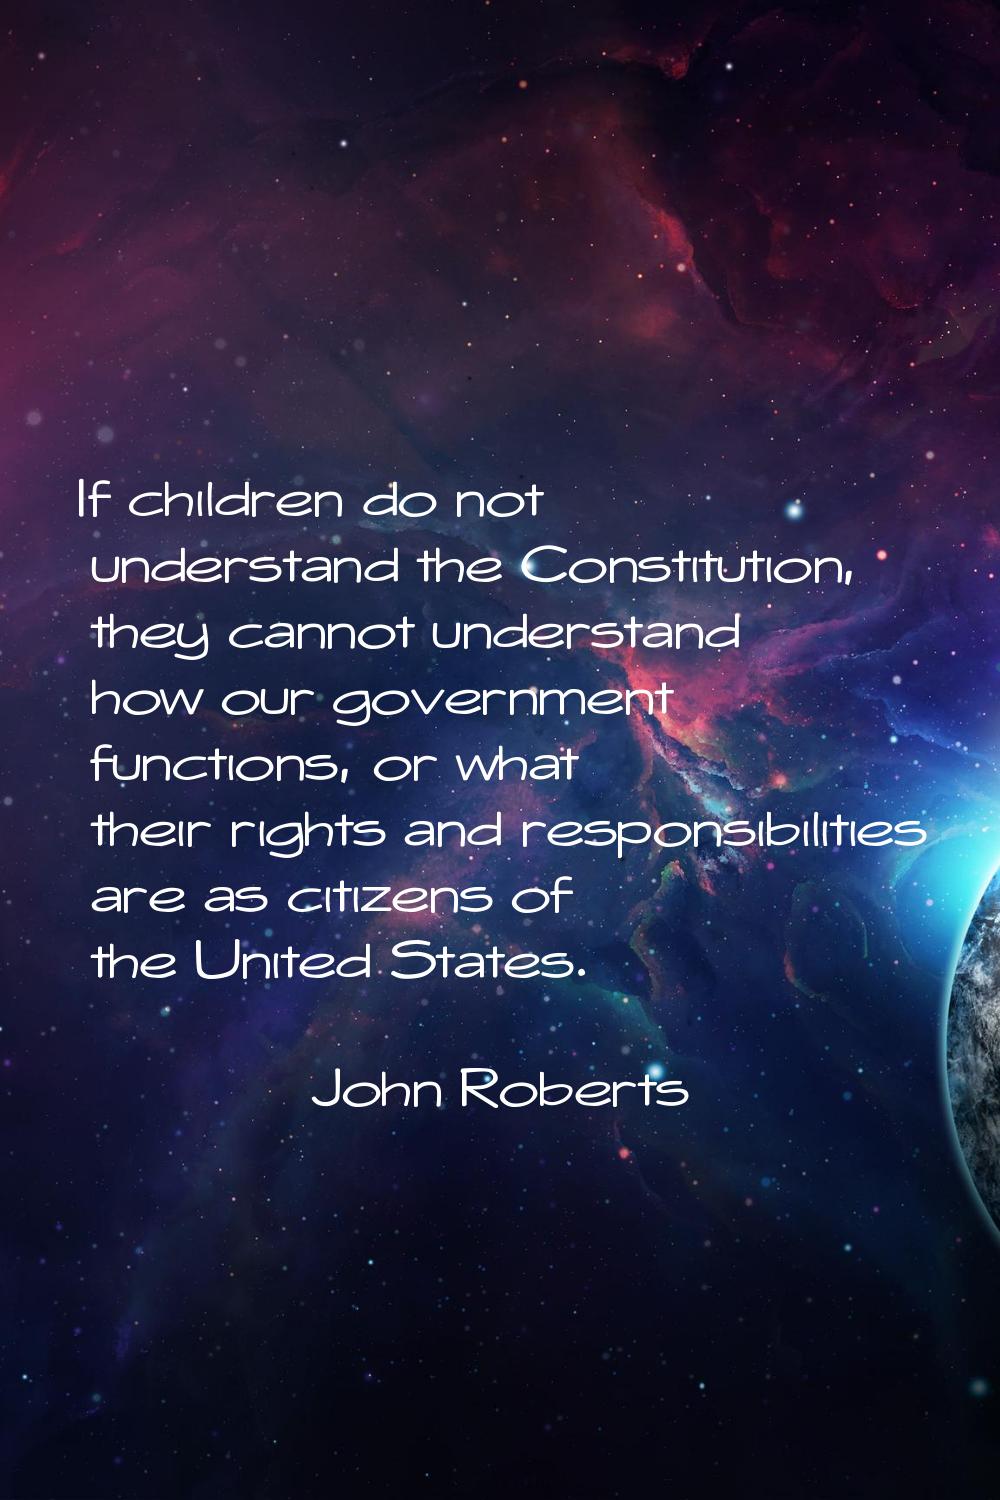 If children do not understand the Constitution, they cannot understand how our government functions